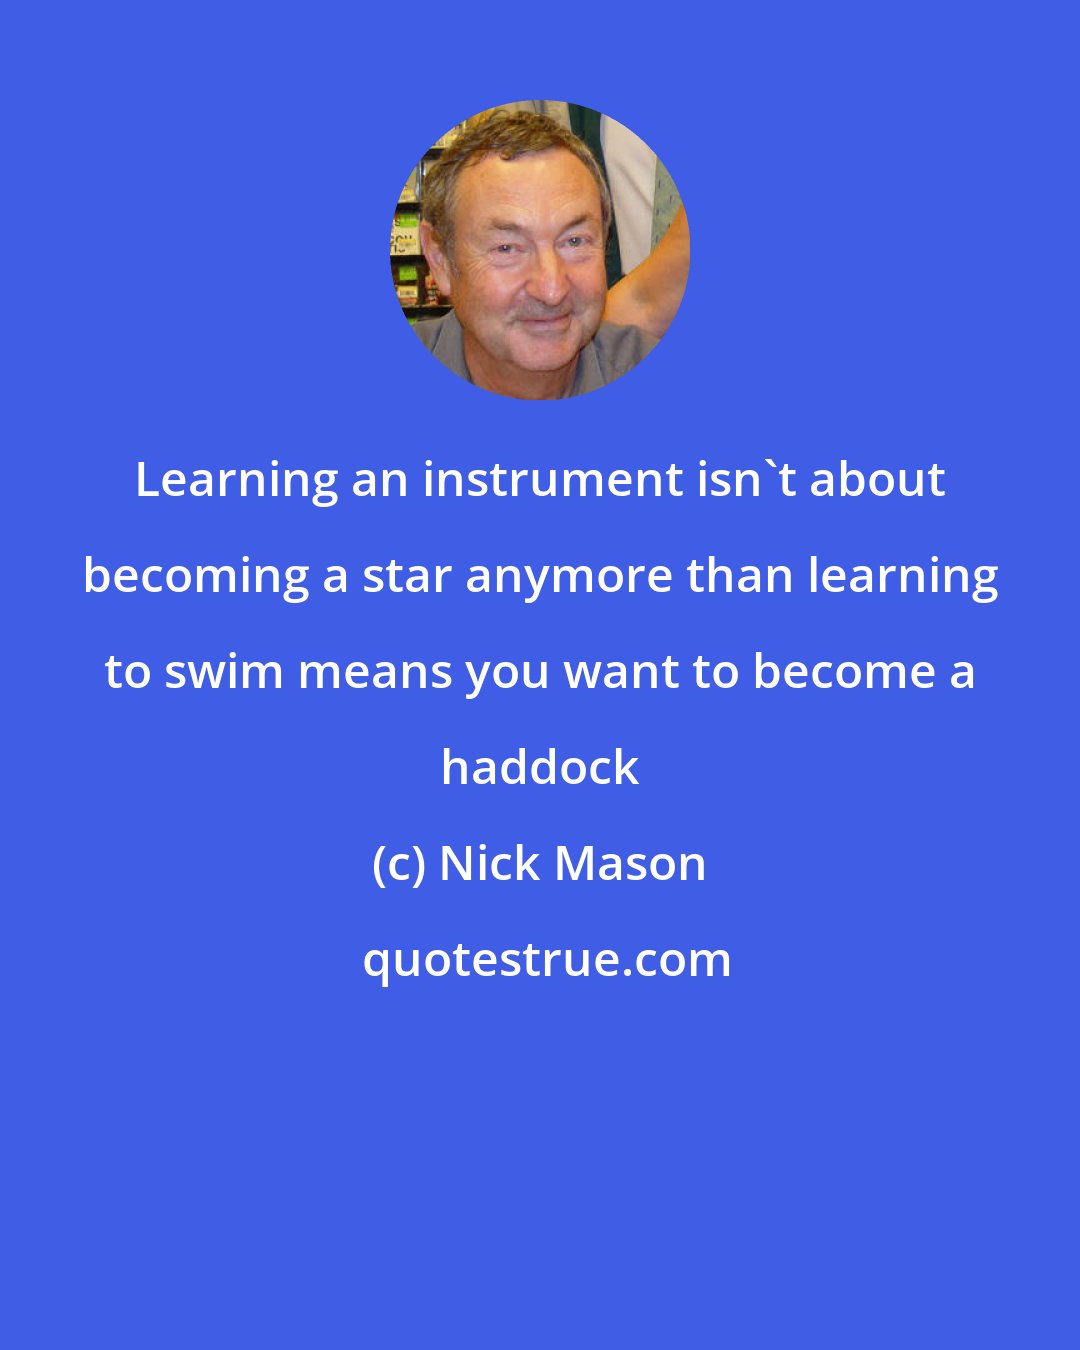 Nick Mason: Learning an instrument isn't about becoming a star anymore than learning to swim means you want to become a haddock